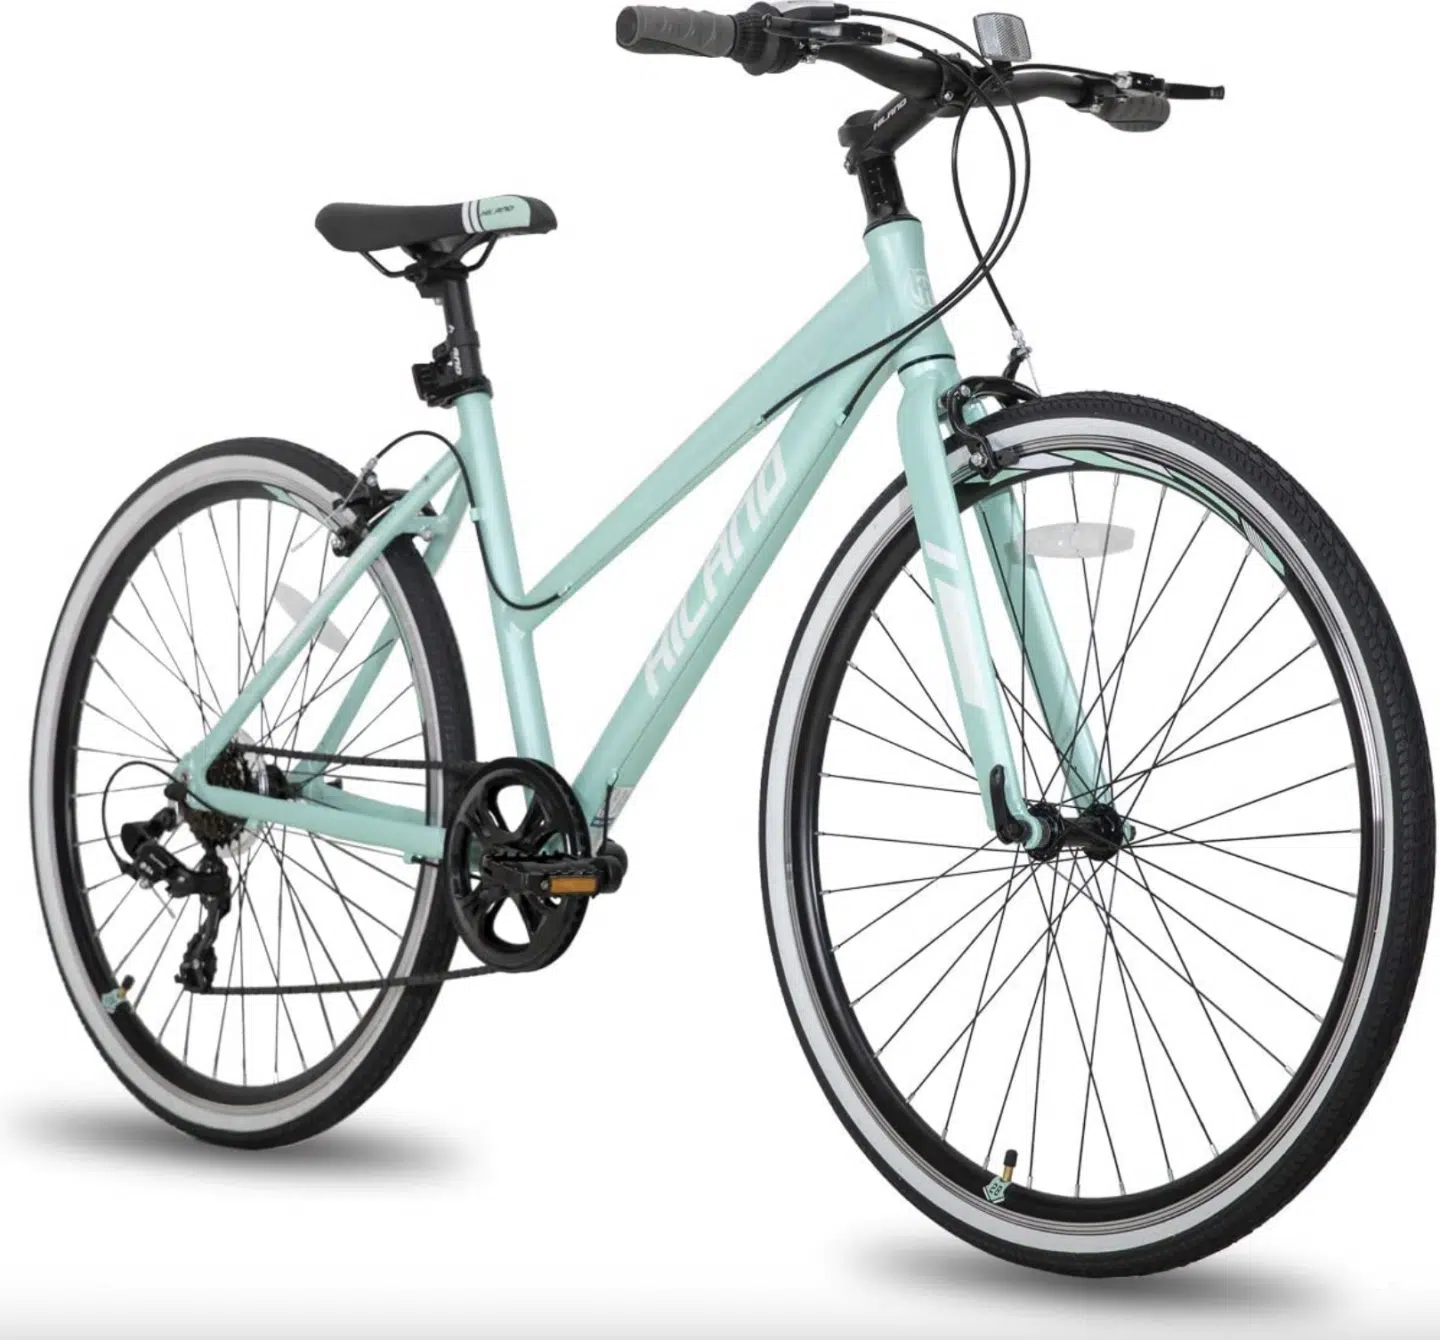 Best womens bicycles, by Blogger What The Fab